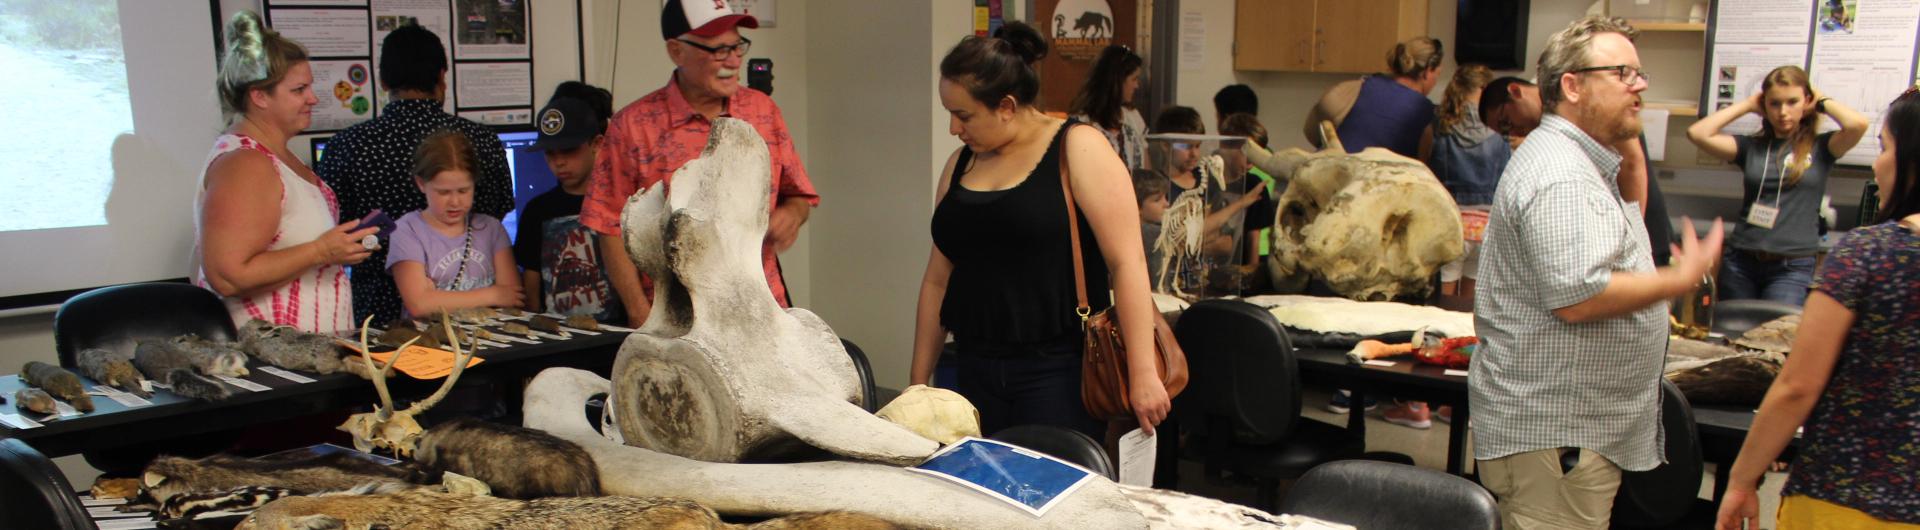 people viewing collection of animal furs and skeletons